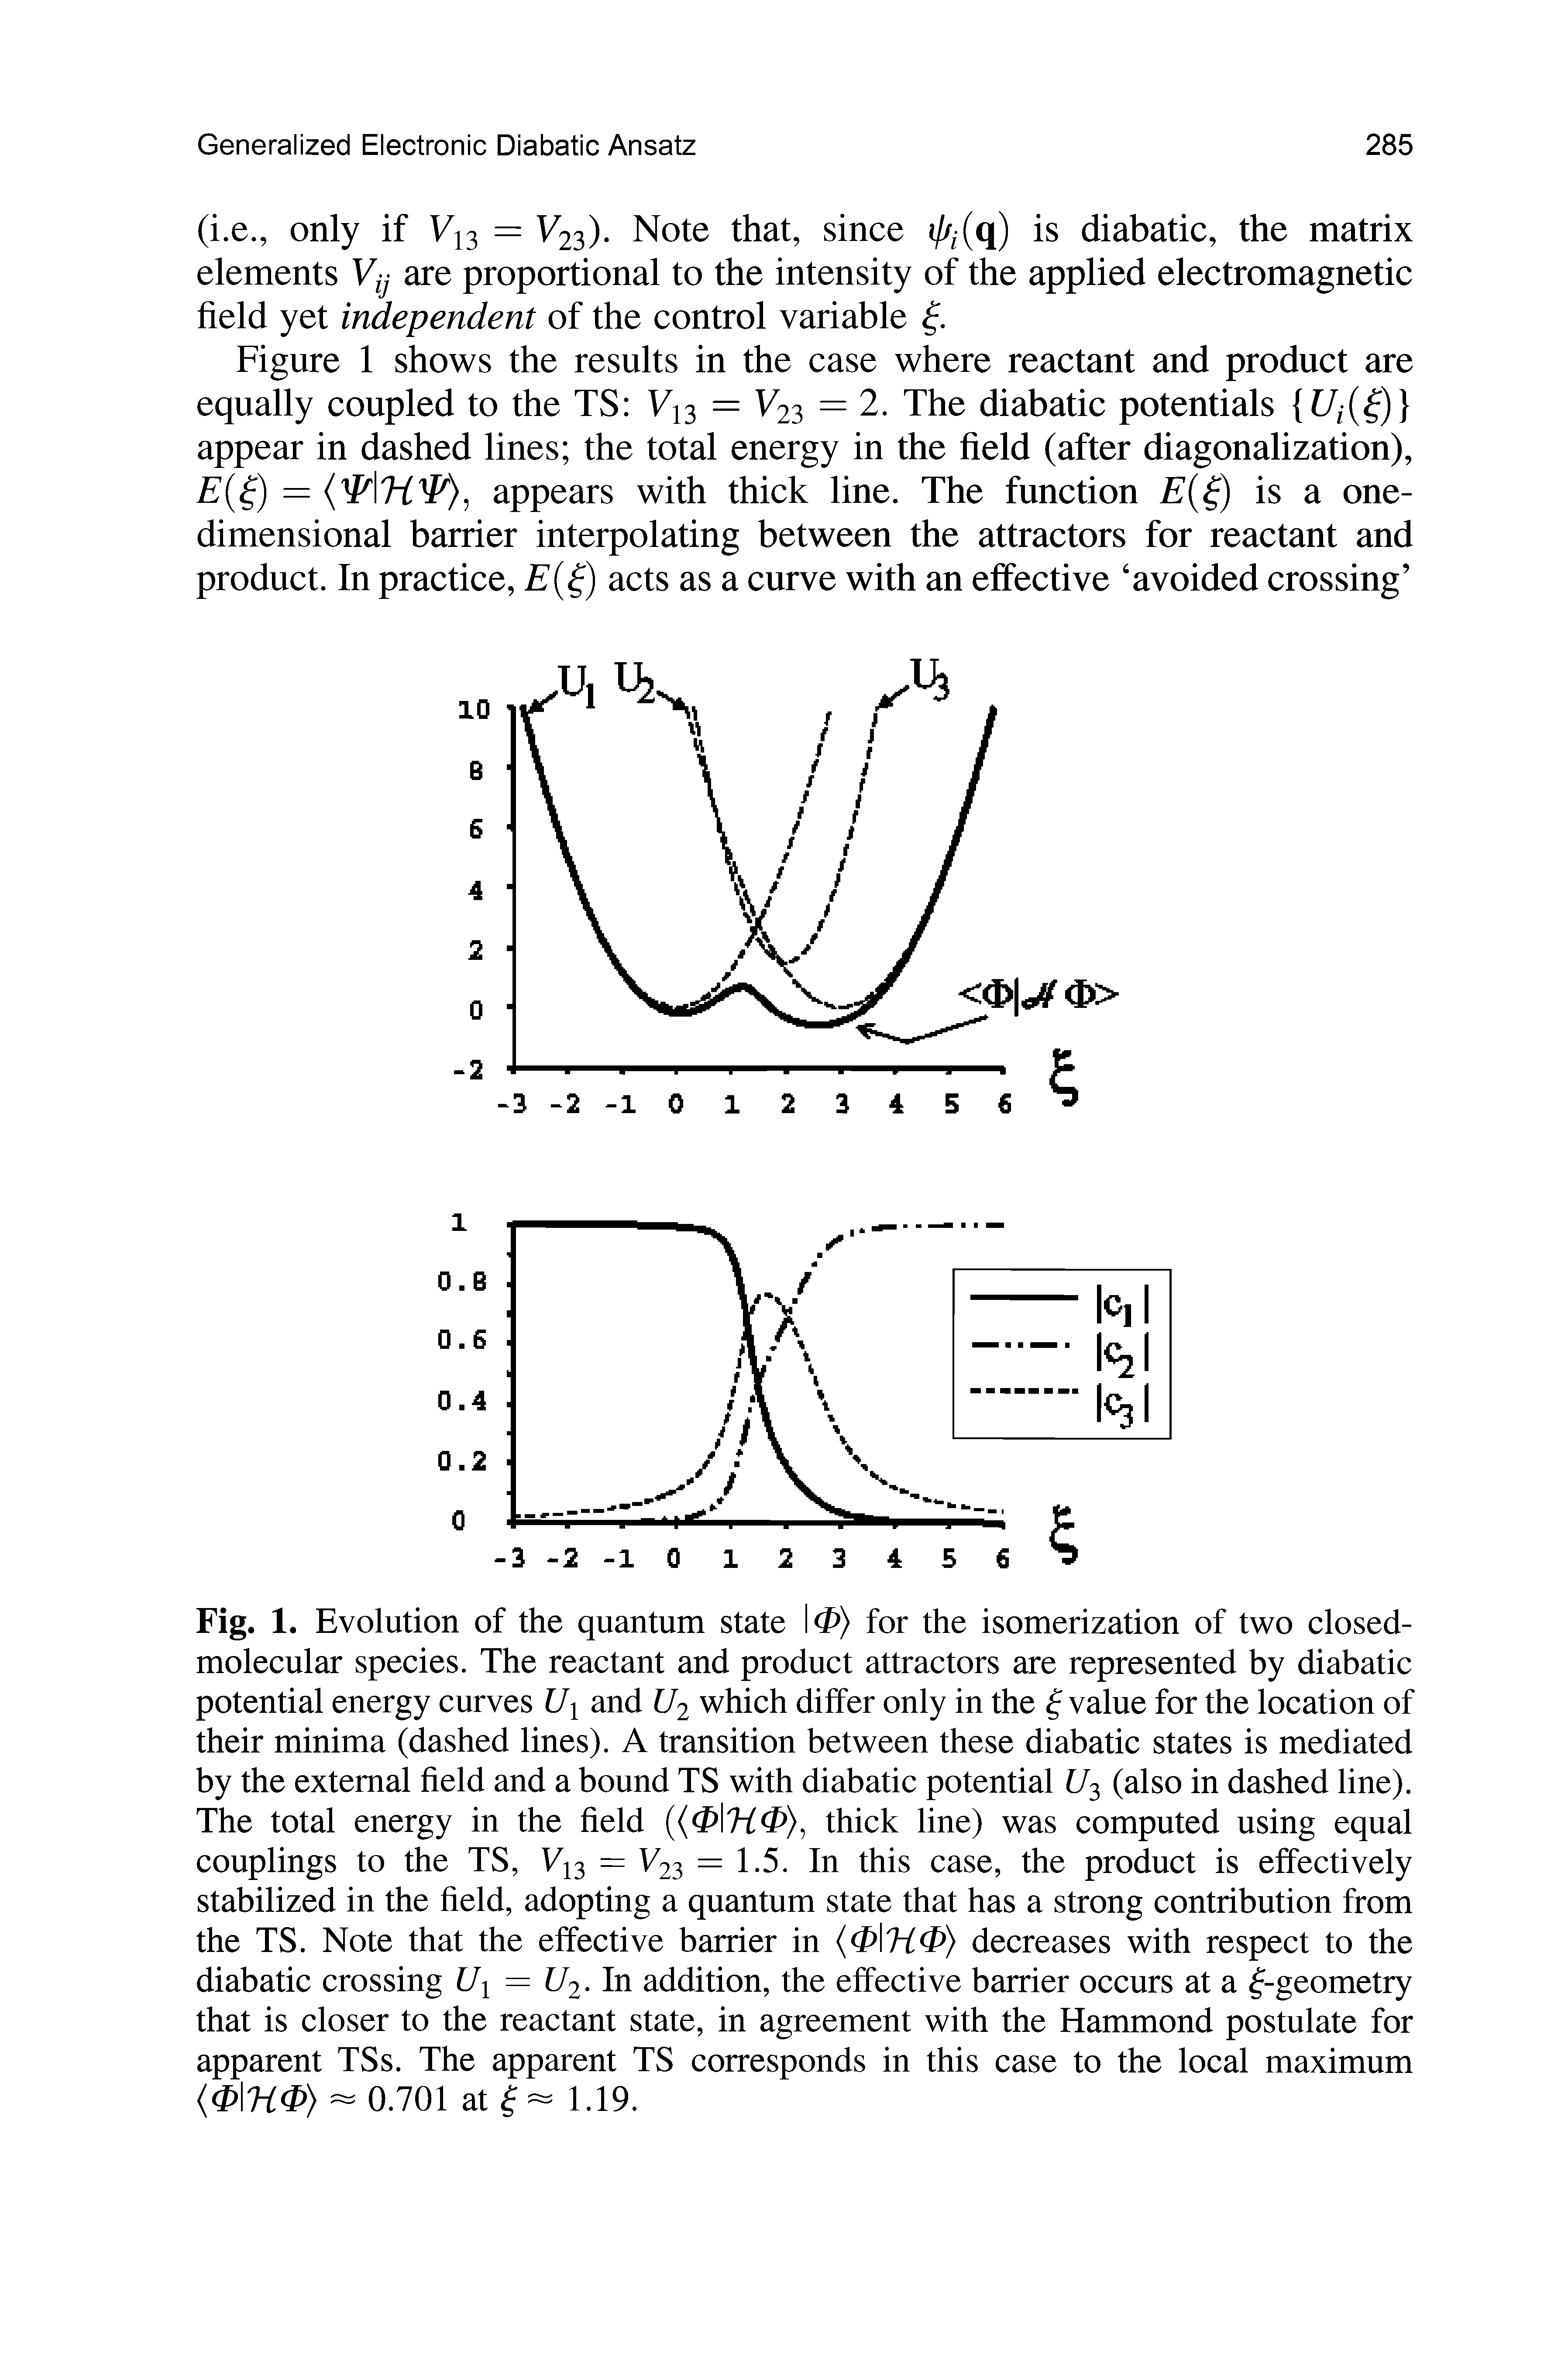 Fig. 1. Evolution of the quantum state <P) for the isomerization of two closed-molecular species. The reactant and product attractors are represented by diabatic potential energy curves Ui and U2 which differ only in the Rvalue for the location of their minima (dashed lines). A transition between these diabatic states is mediated by the external field and a bound TS with diabatic potential U3 (also in dashed line). The total energy in the field thick line) was computed using equal...